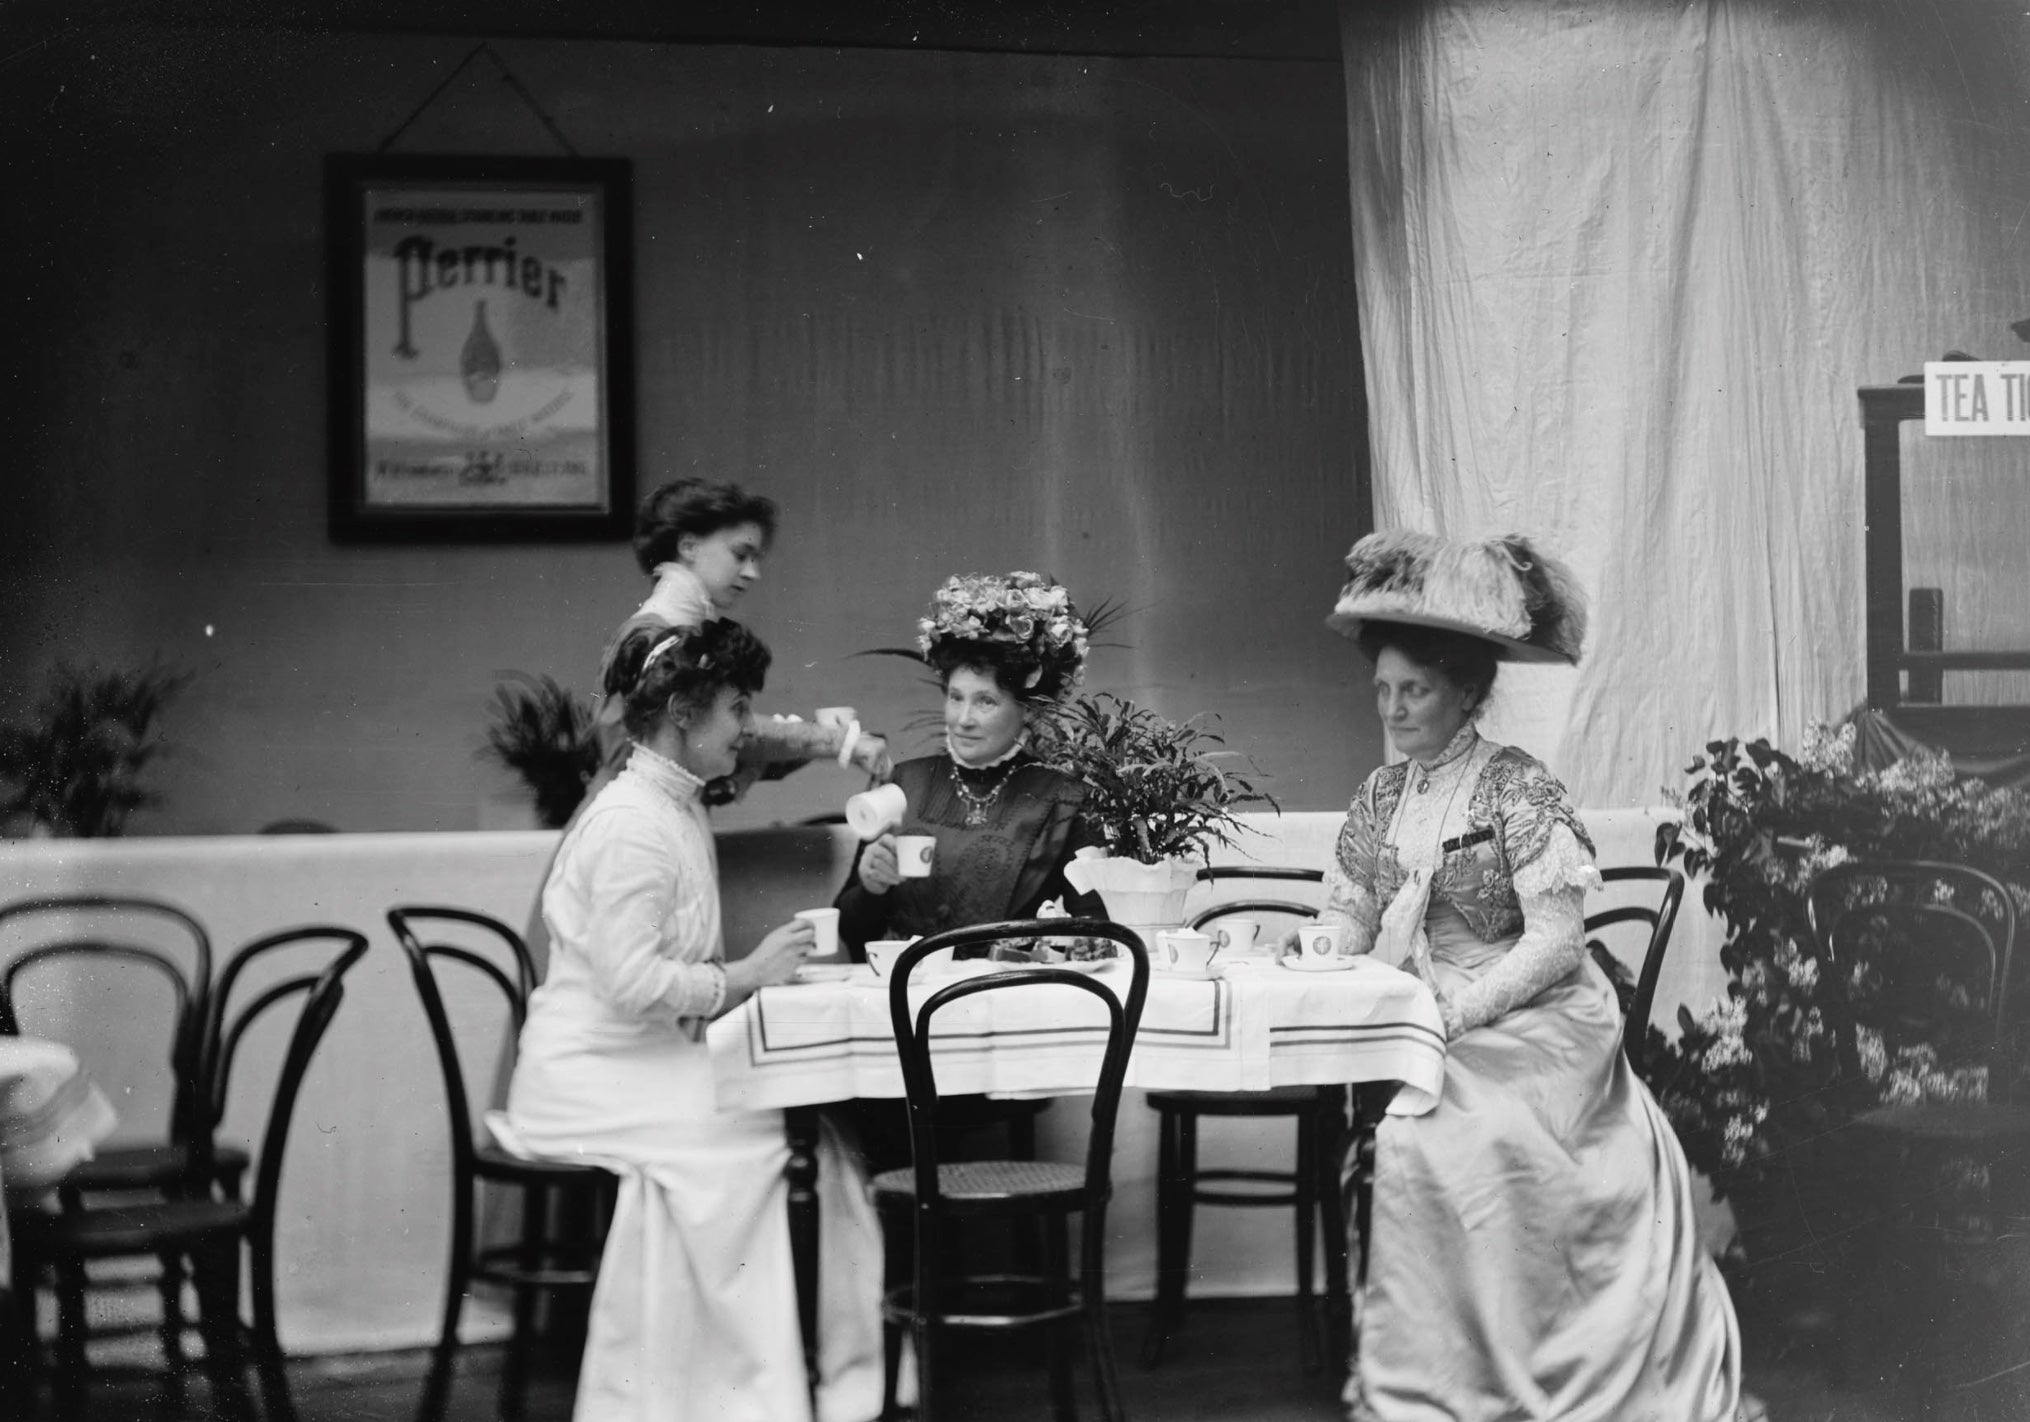 Women Drinking Tea at The Refreshment Department at the Women's Exhibition 1909